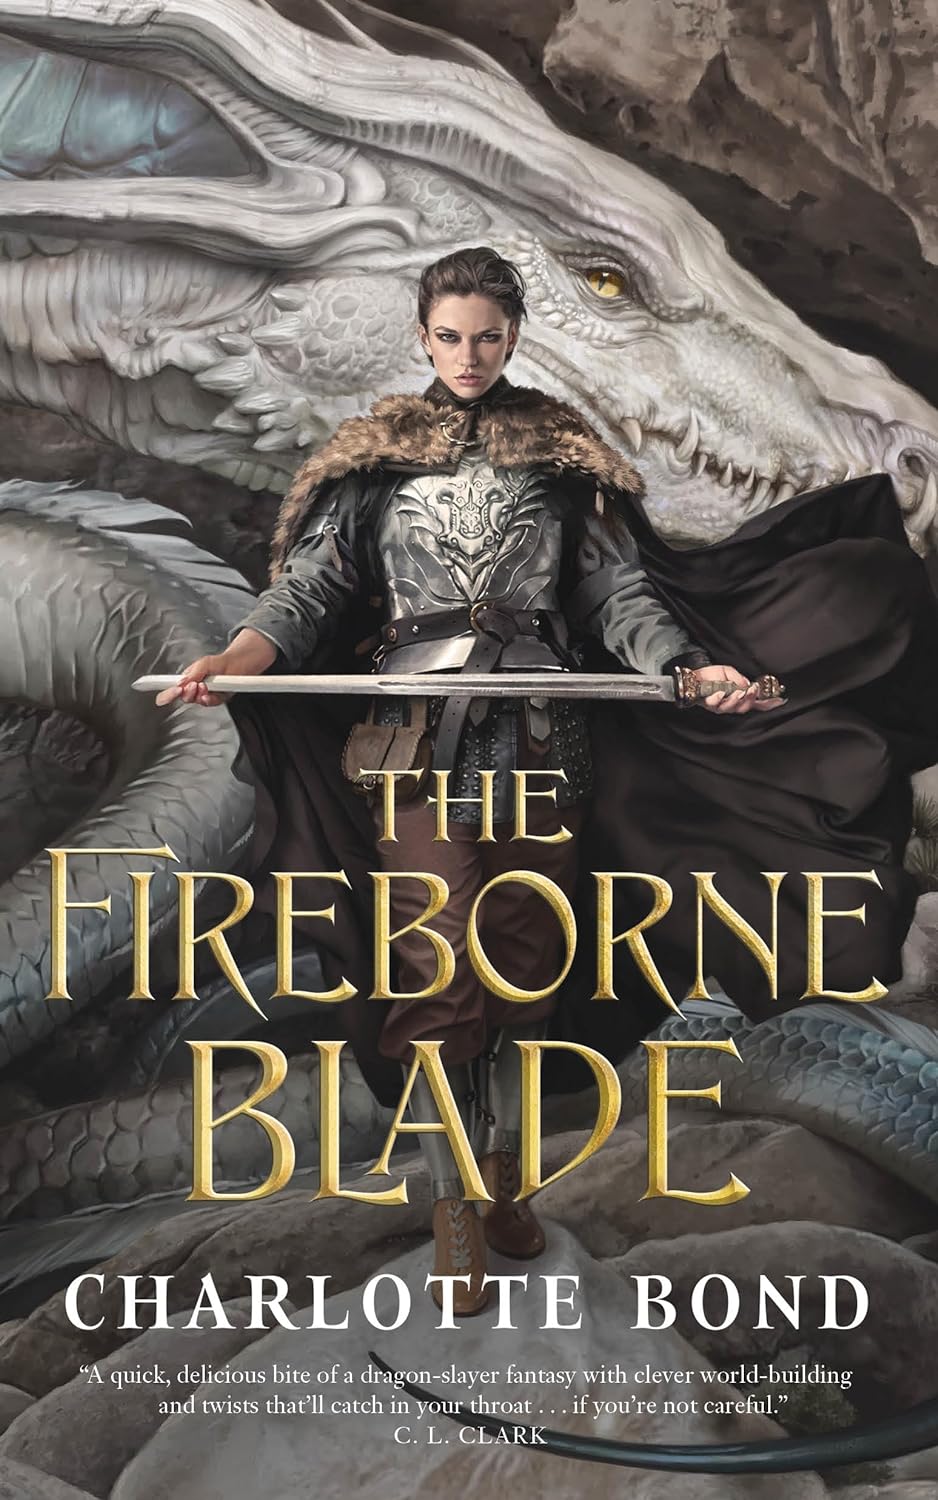 Image for "The Fireborne Blade"